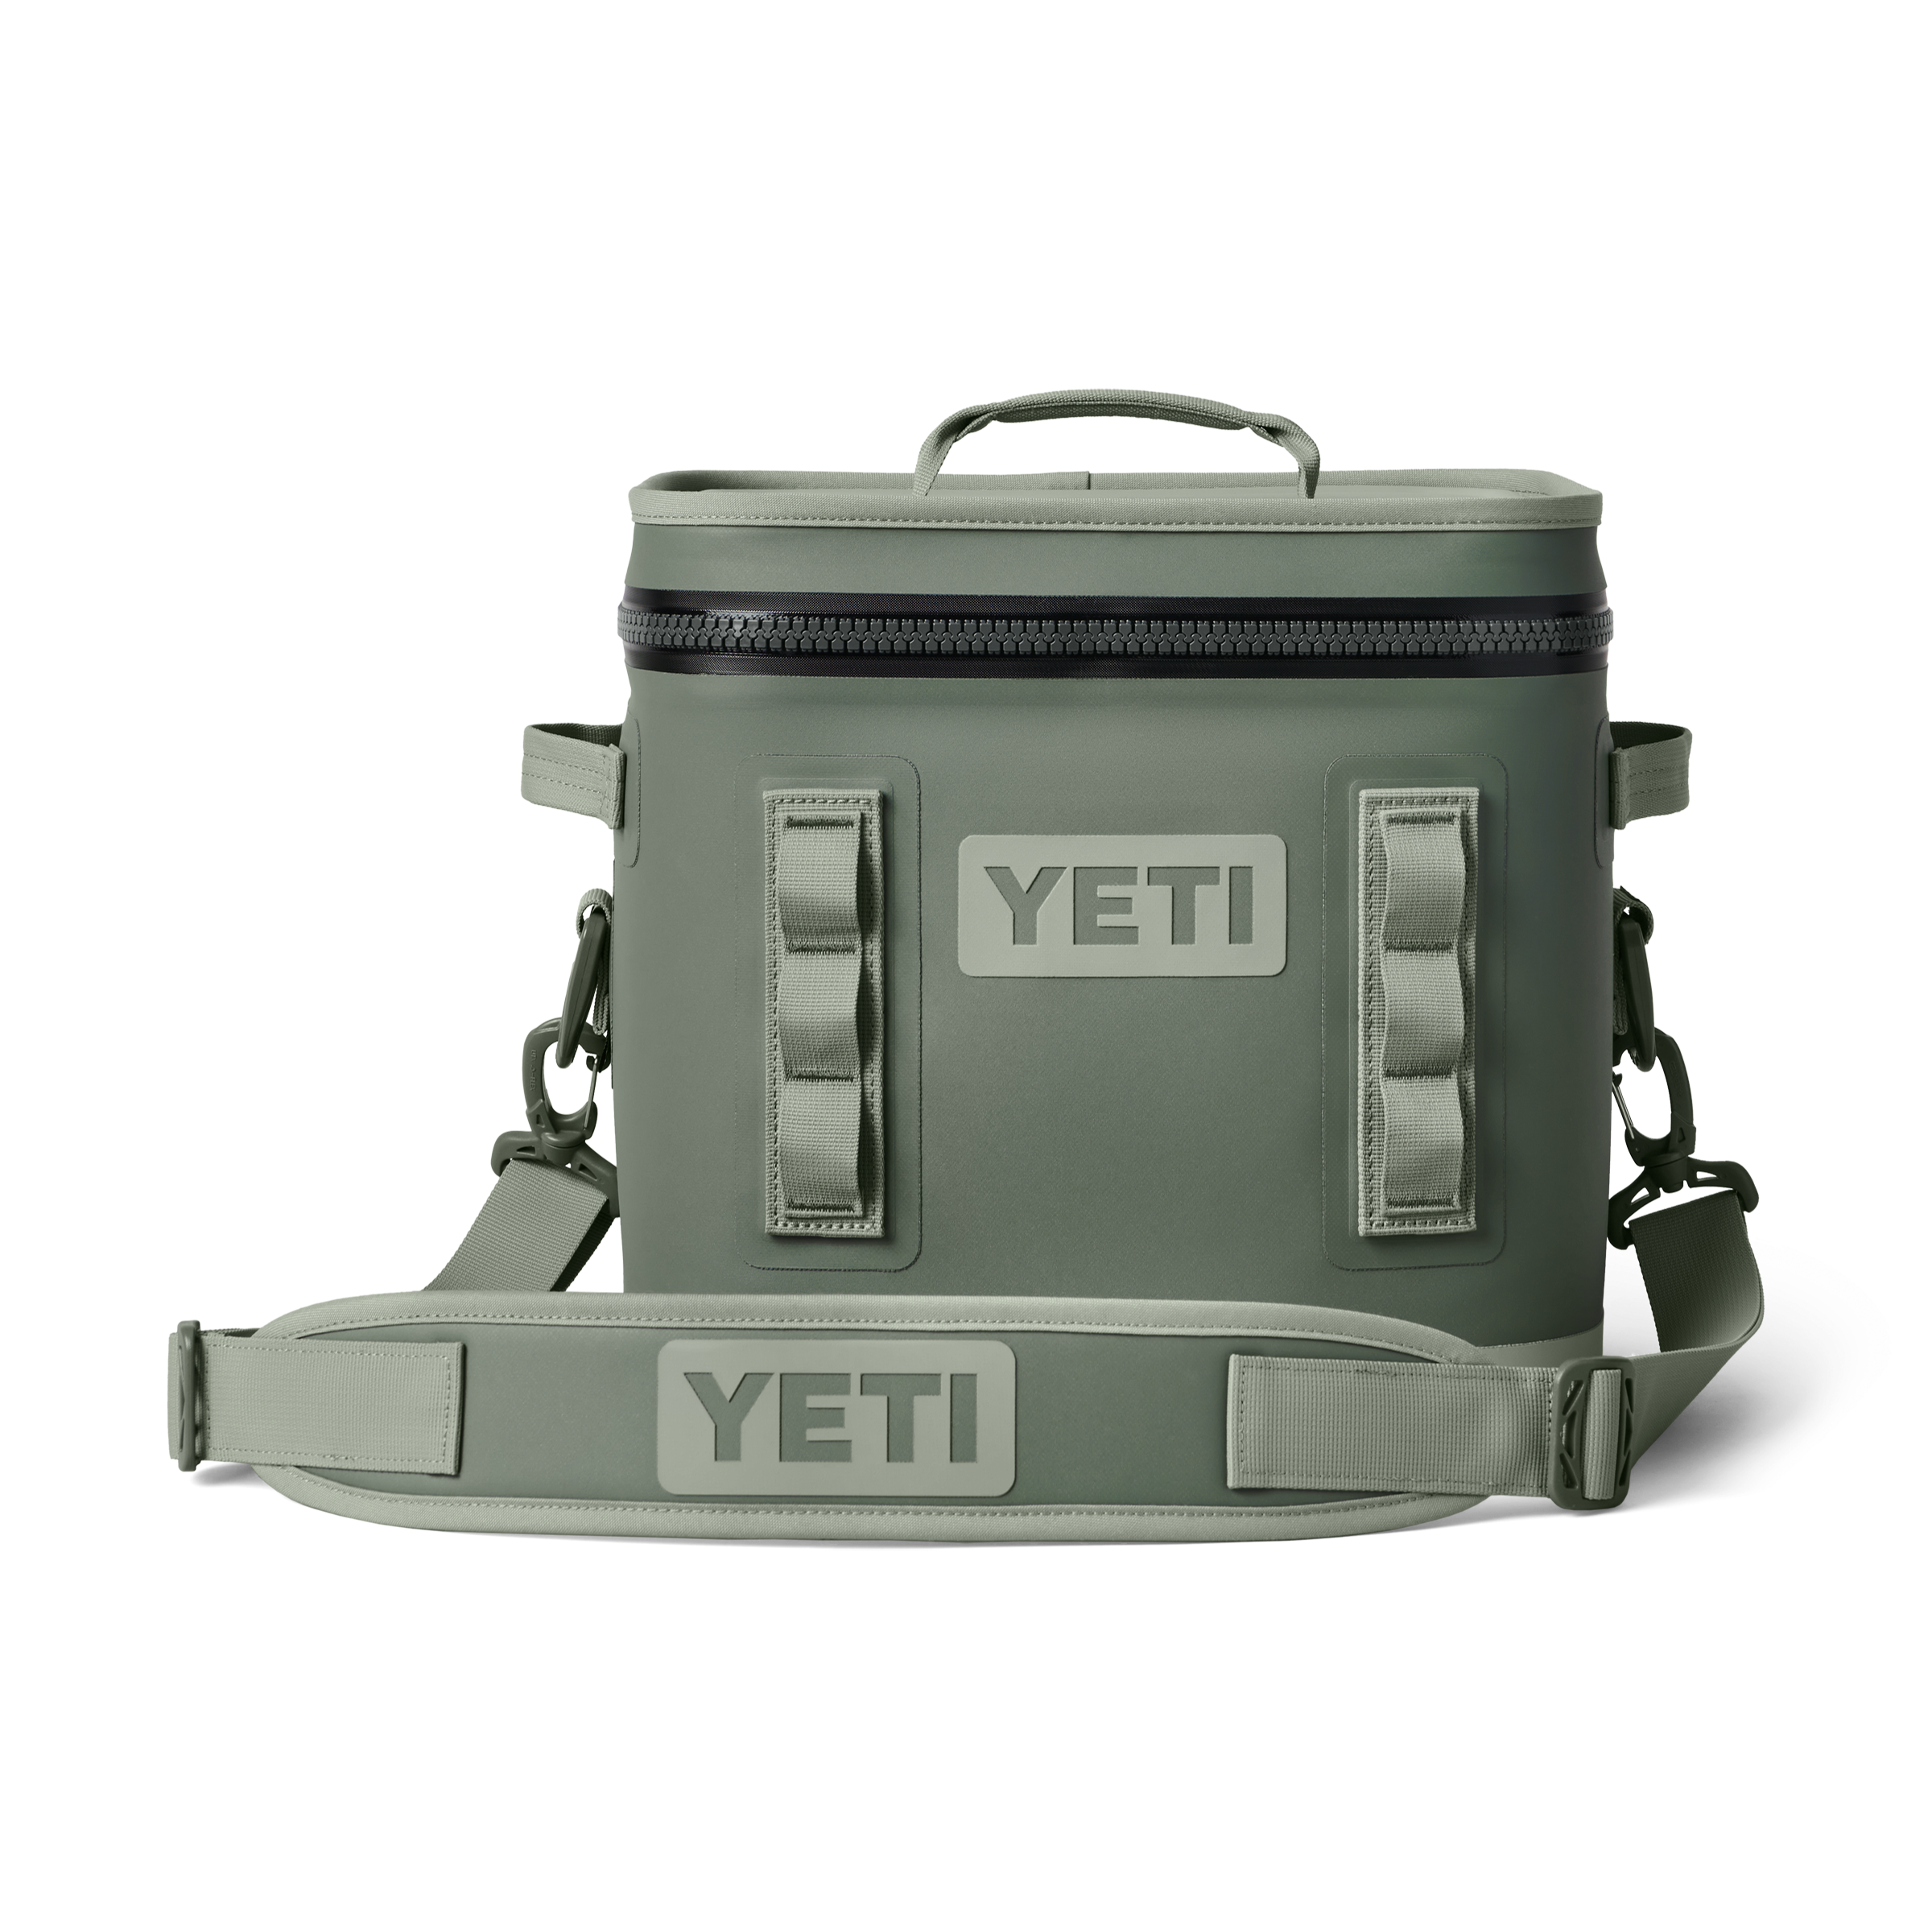 Richmond Ducks Unlimited - The Ultimate Waterfowl - Yeti Loadout Bucket  with Clear Lid & Rig'em Right Gear Belt - Accessories in photo will be  custom selected by our volunteers! Purchase your